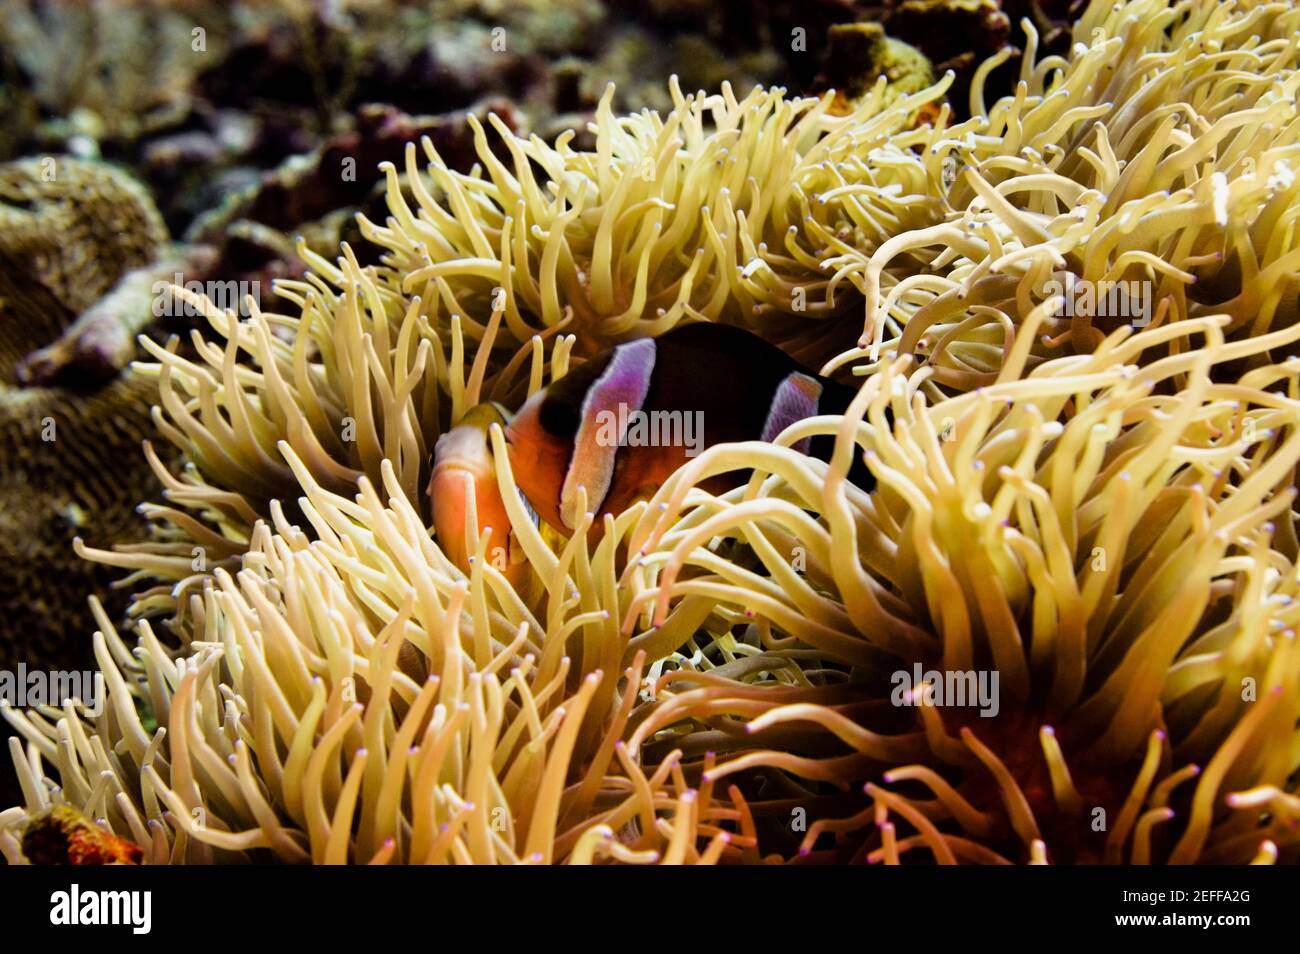 ClarkÅ½s anemonefish Amphiprion clarkii in sea anemone, North Sulawesi, Sulawesi, Indonesia Stock Photo